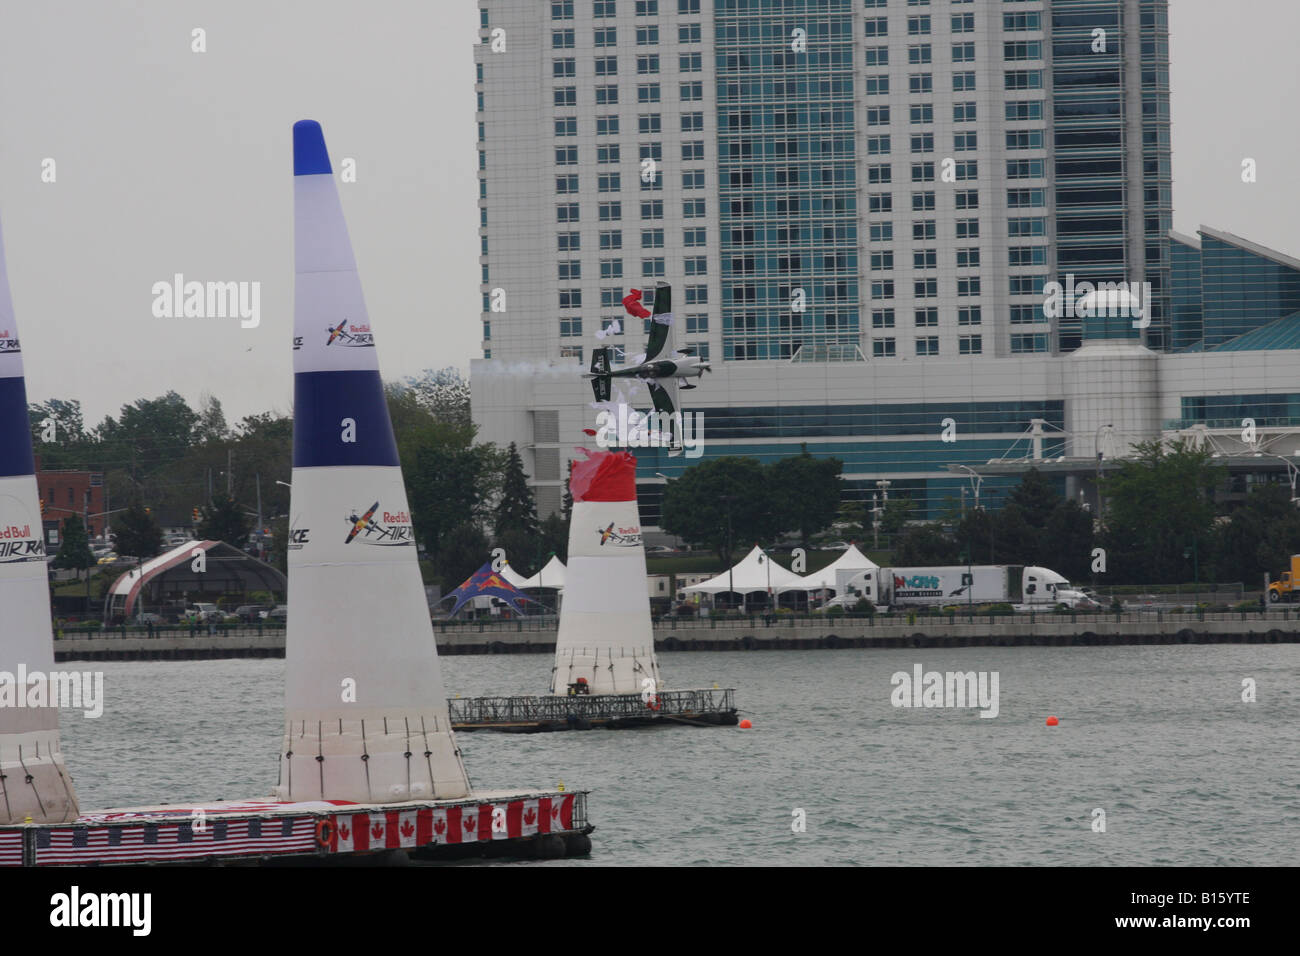 Red Bull Air Race World Series in Detroit, Michigan Stock Photo